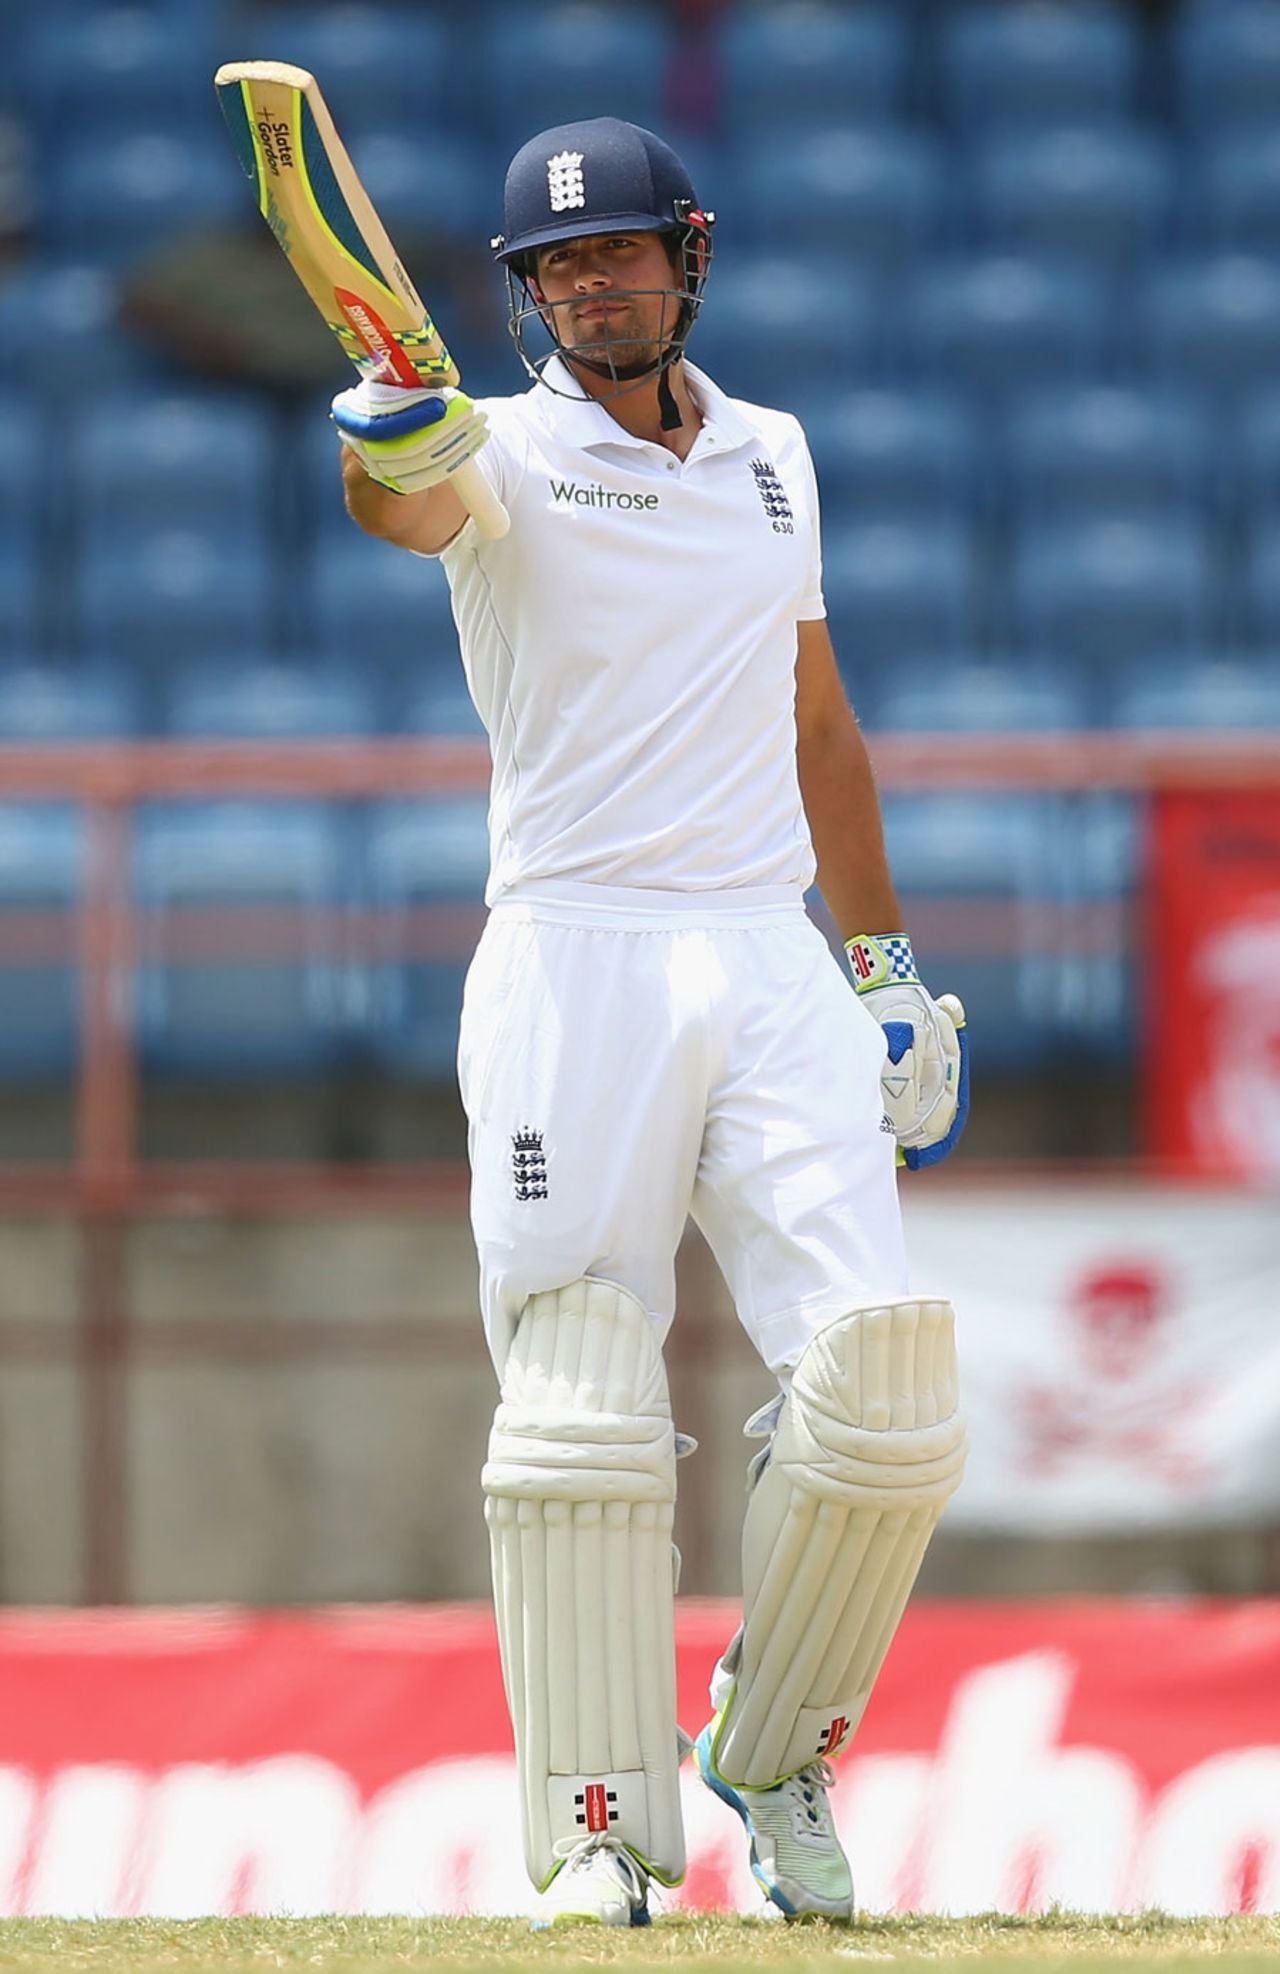 Alastair Cook acknowledges his half-century, West Indies v England, 2nd Test, St George's, 3rd day, April 23, 2015